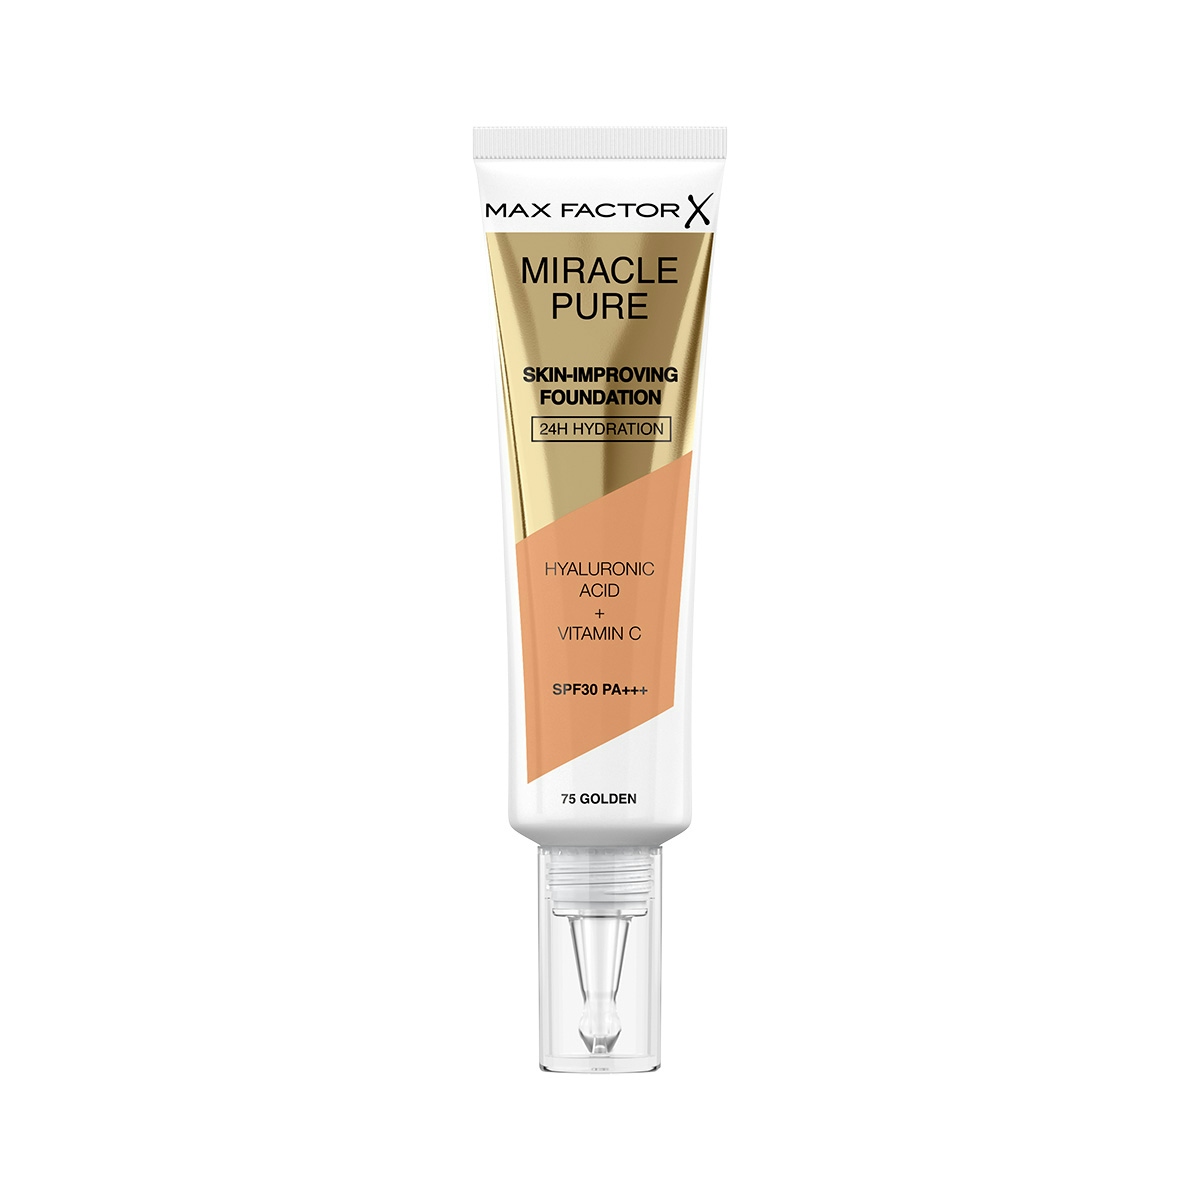 Foundation Miracle Pure Max Factor